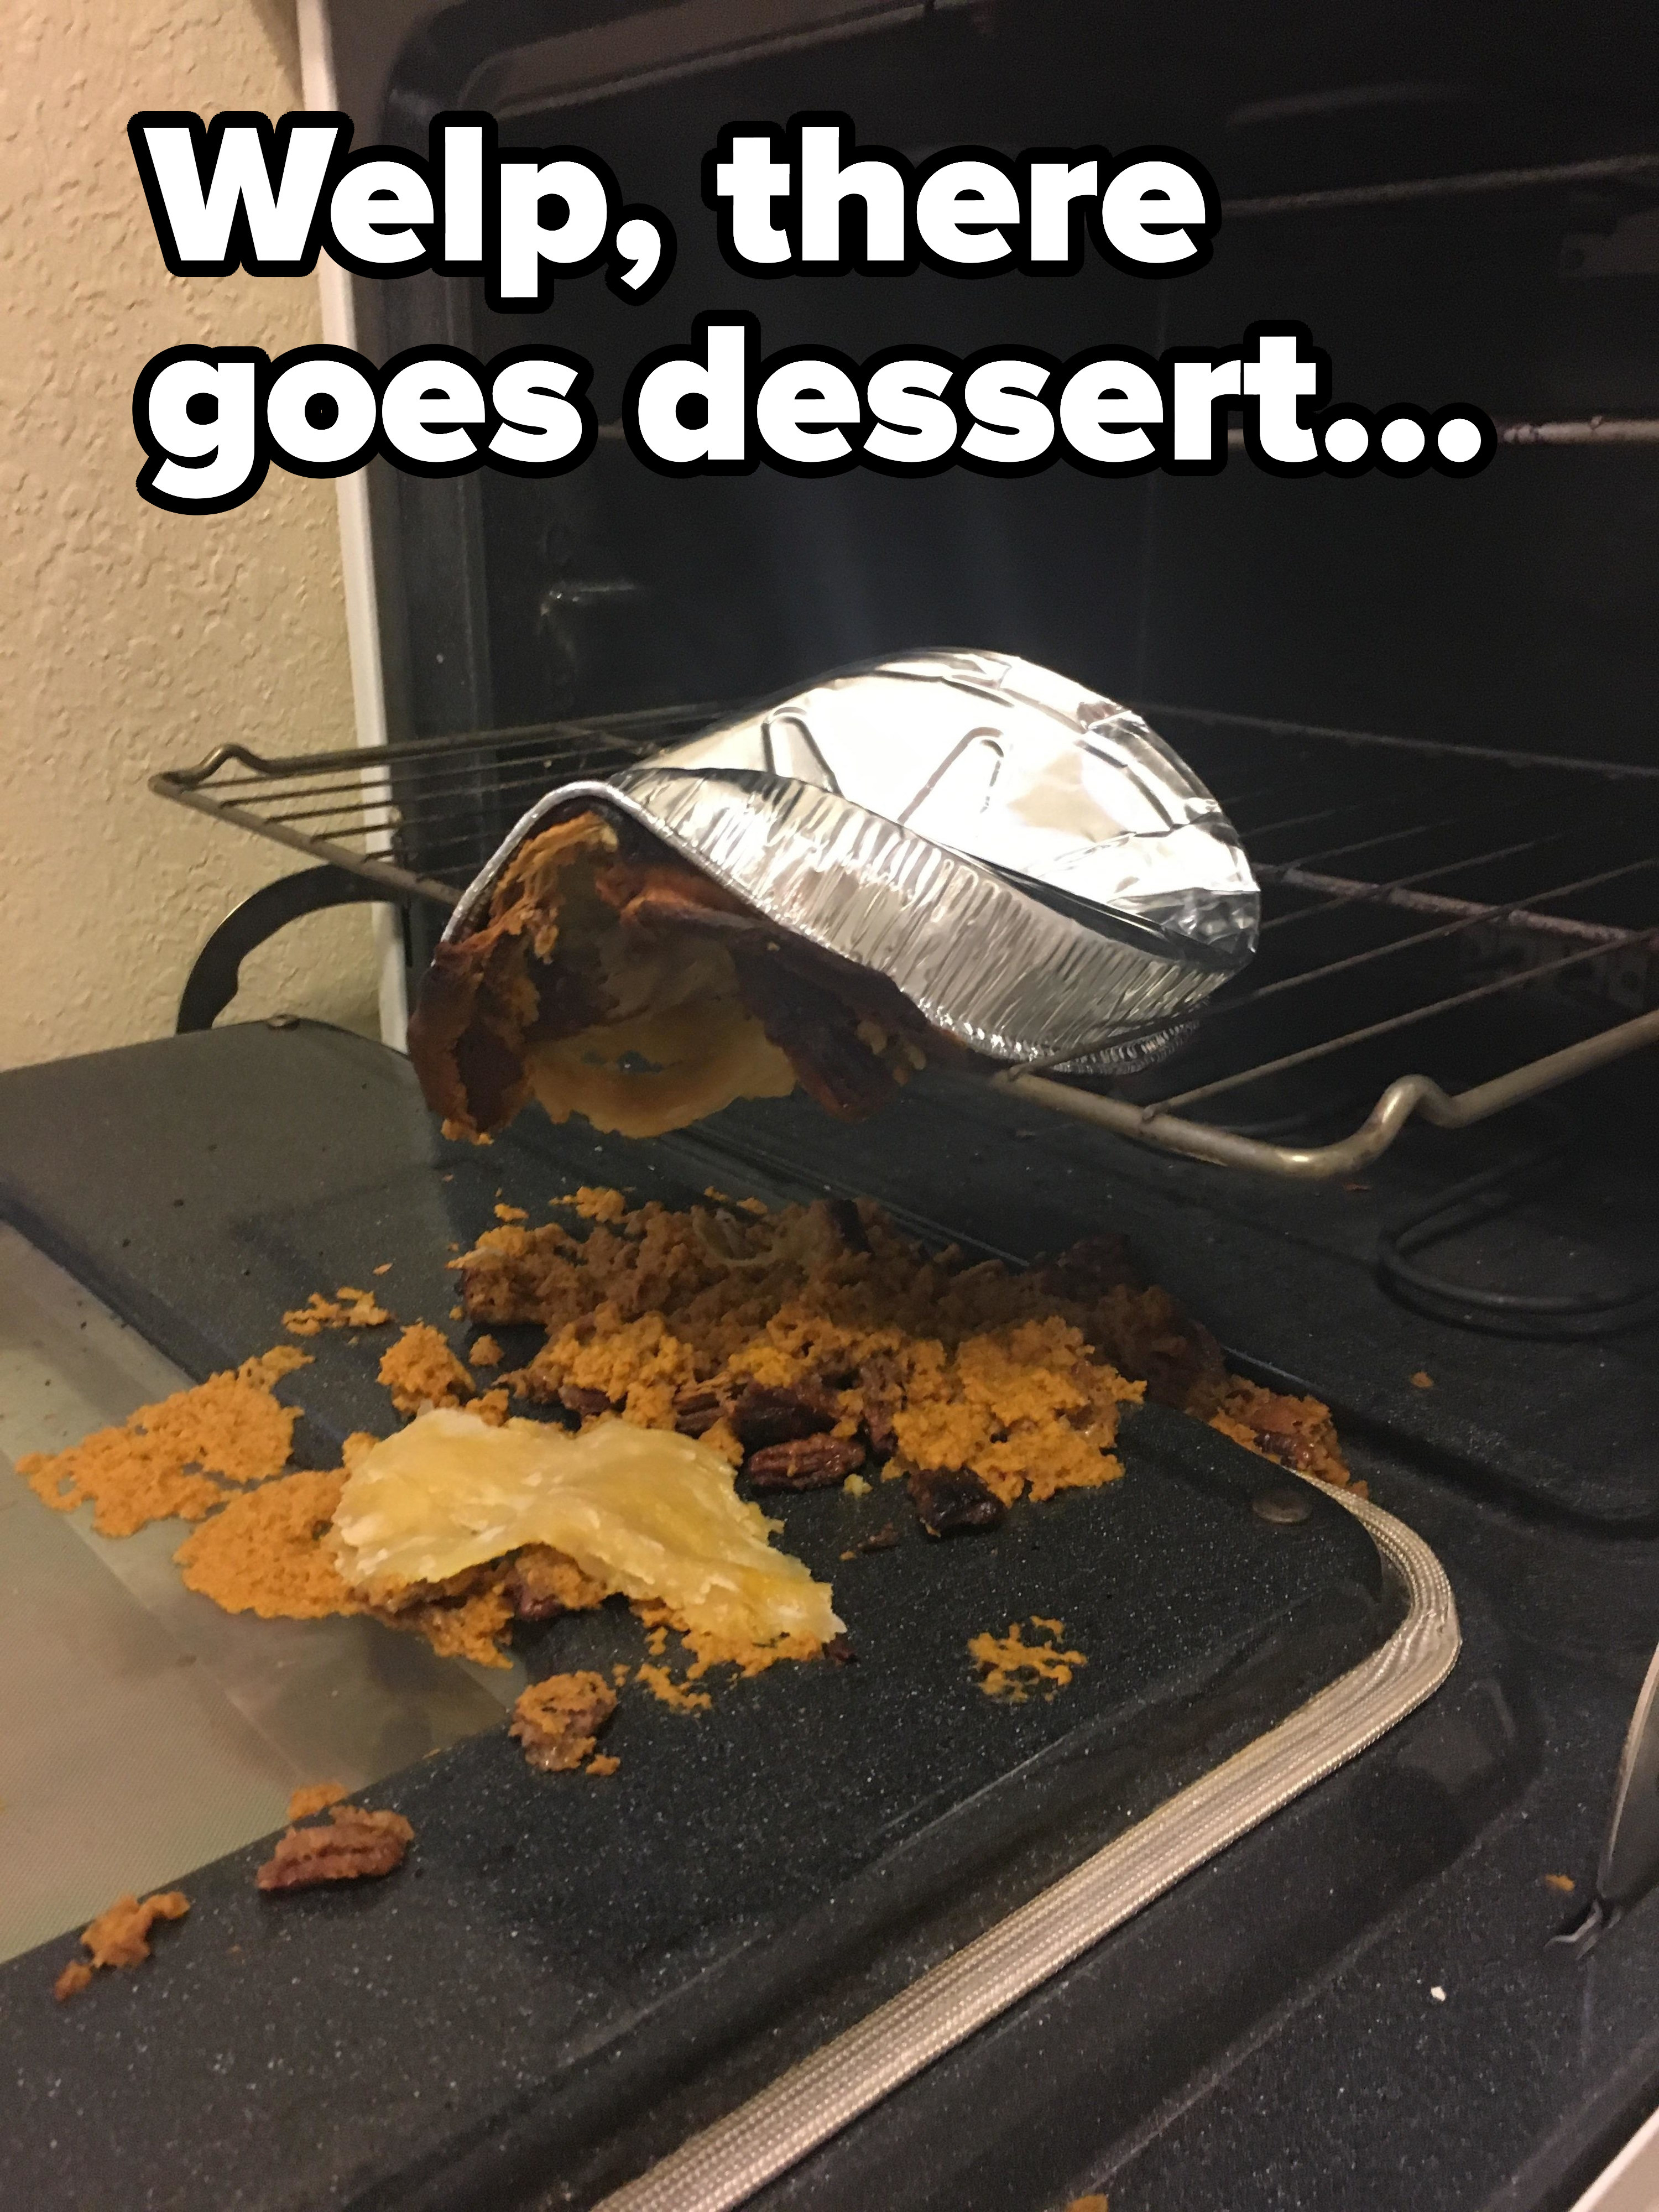 An upside-down pie falls all over the bottom of the oven